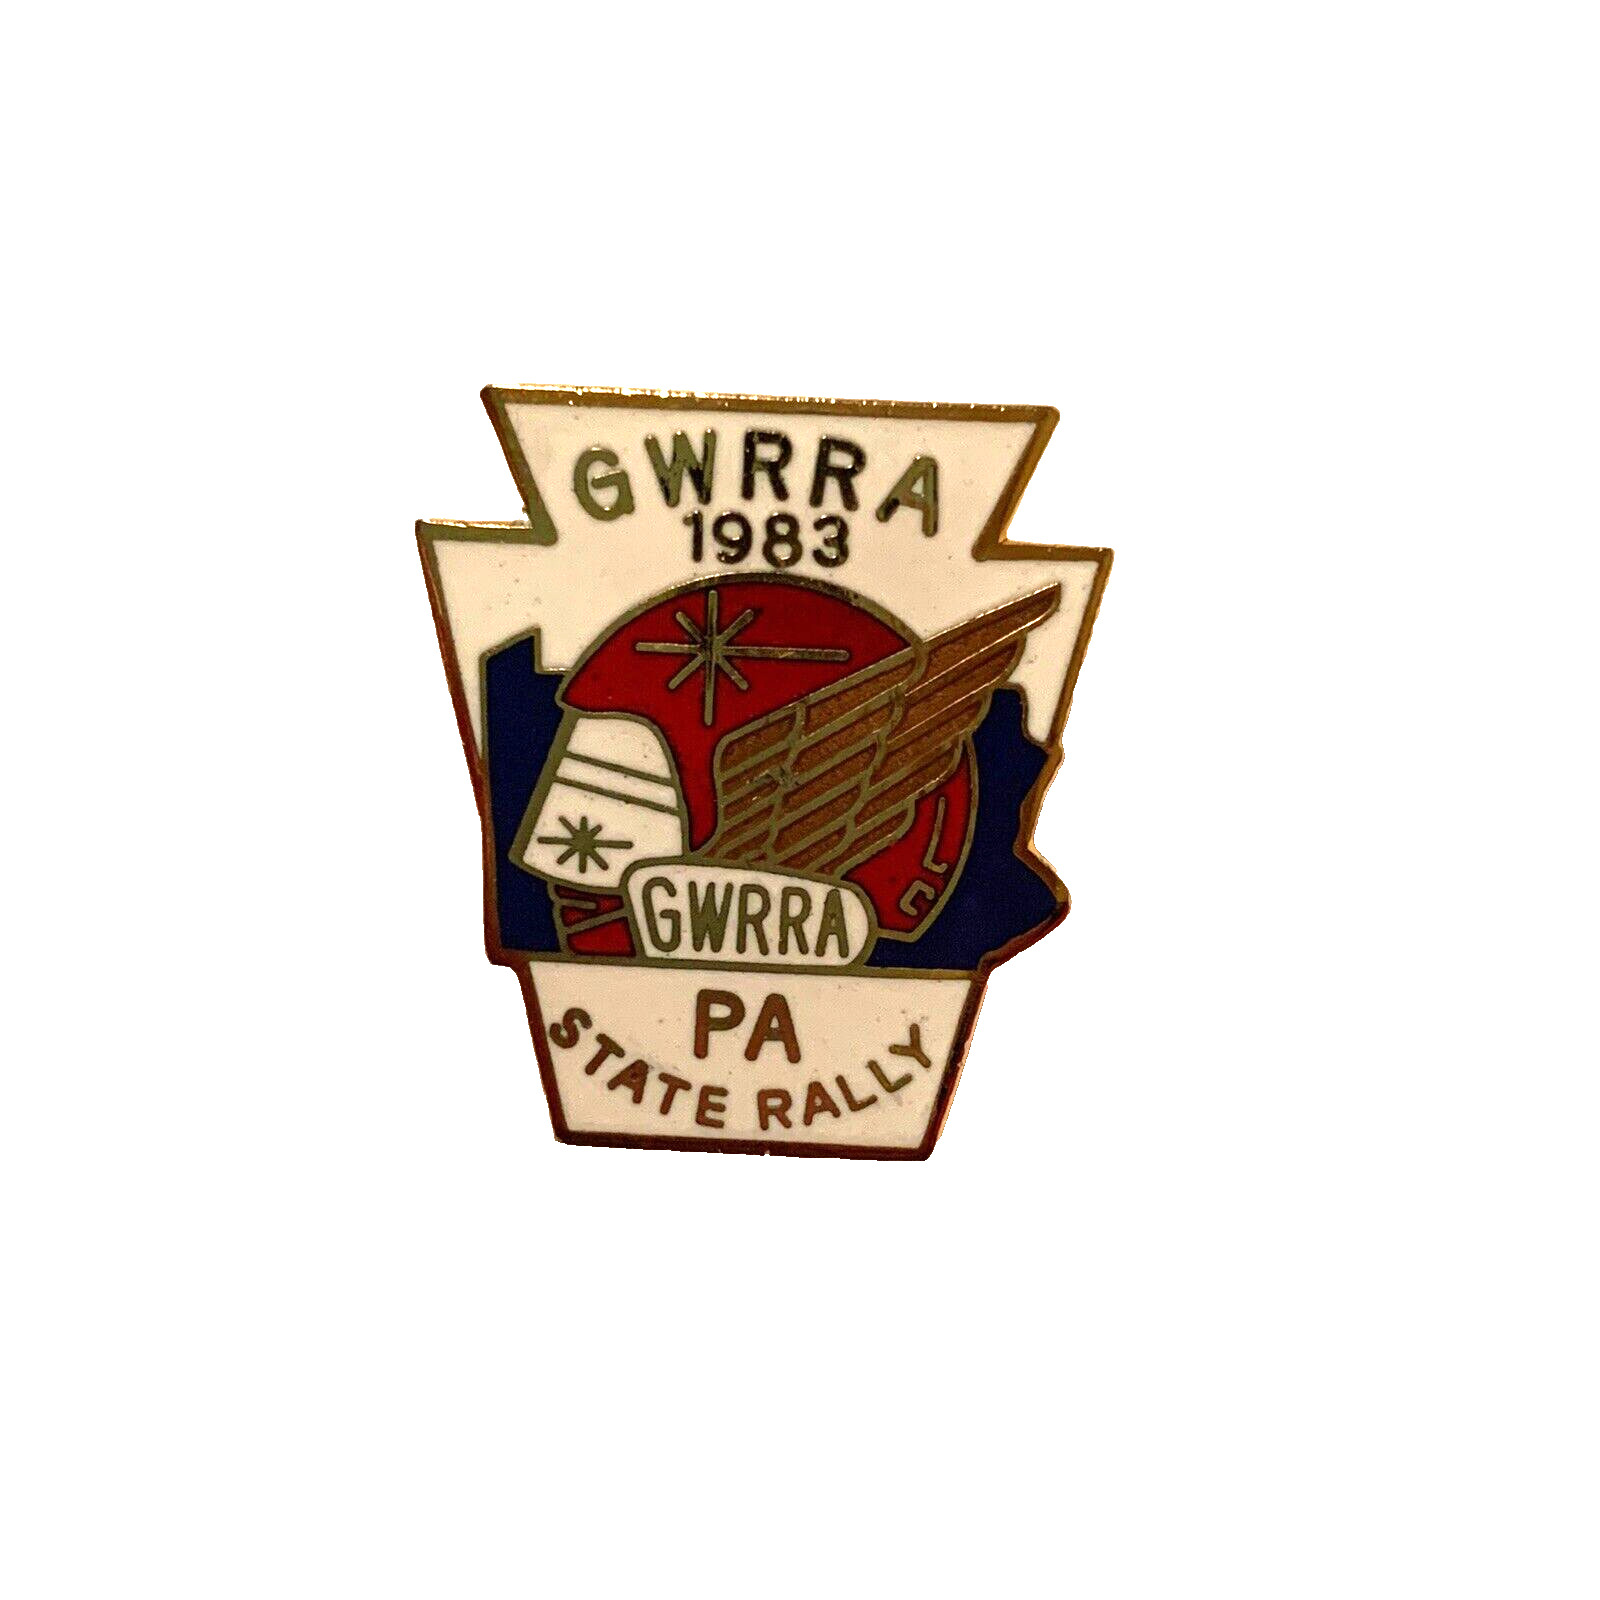 GWRRA Gold Wing Road Riders Association of PA State Rally MOTORCYCLE Screw Back